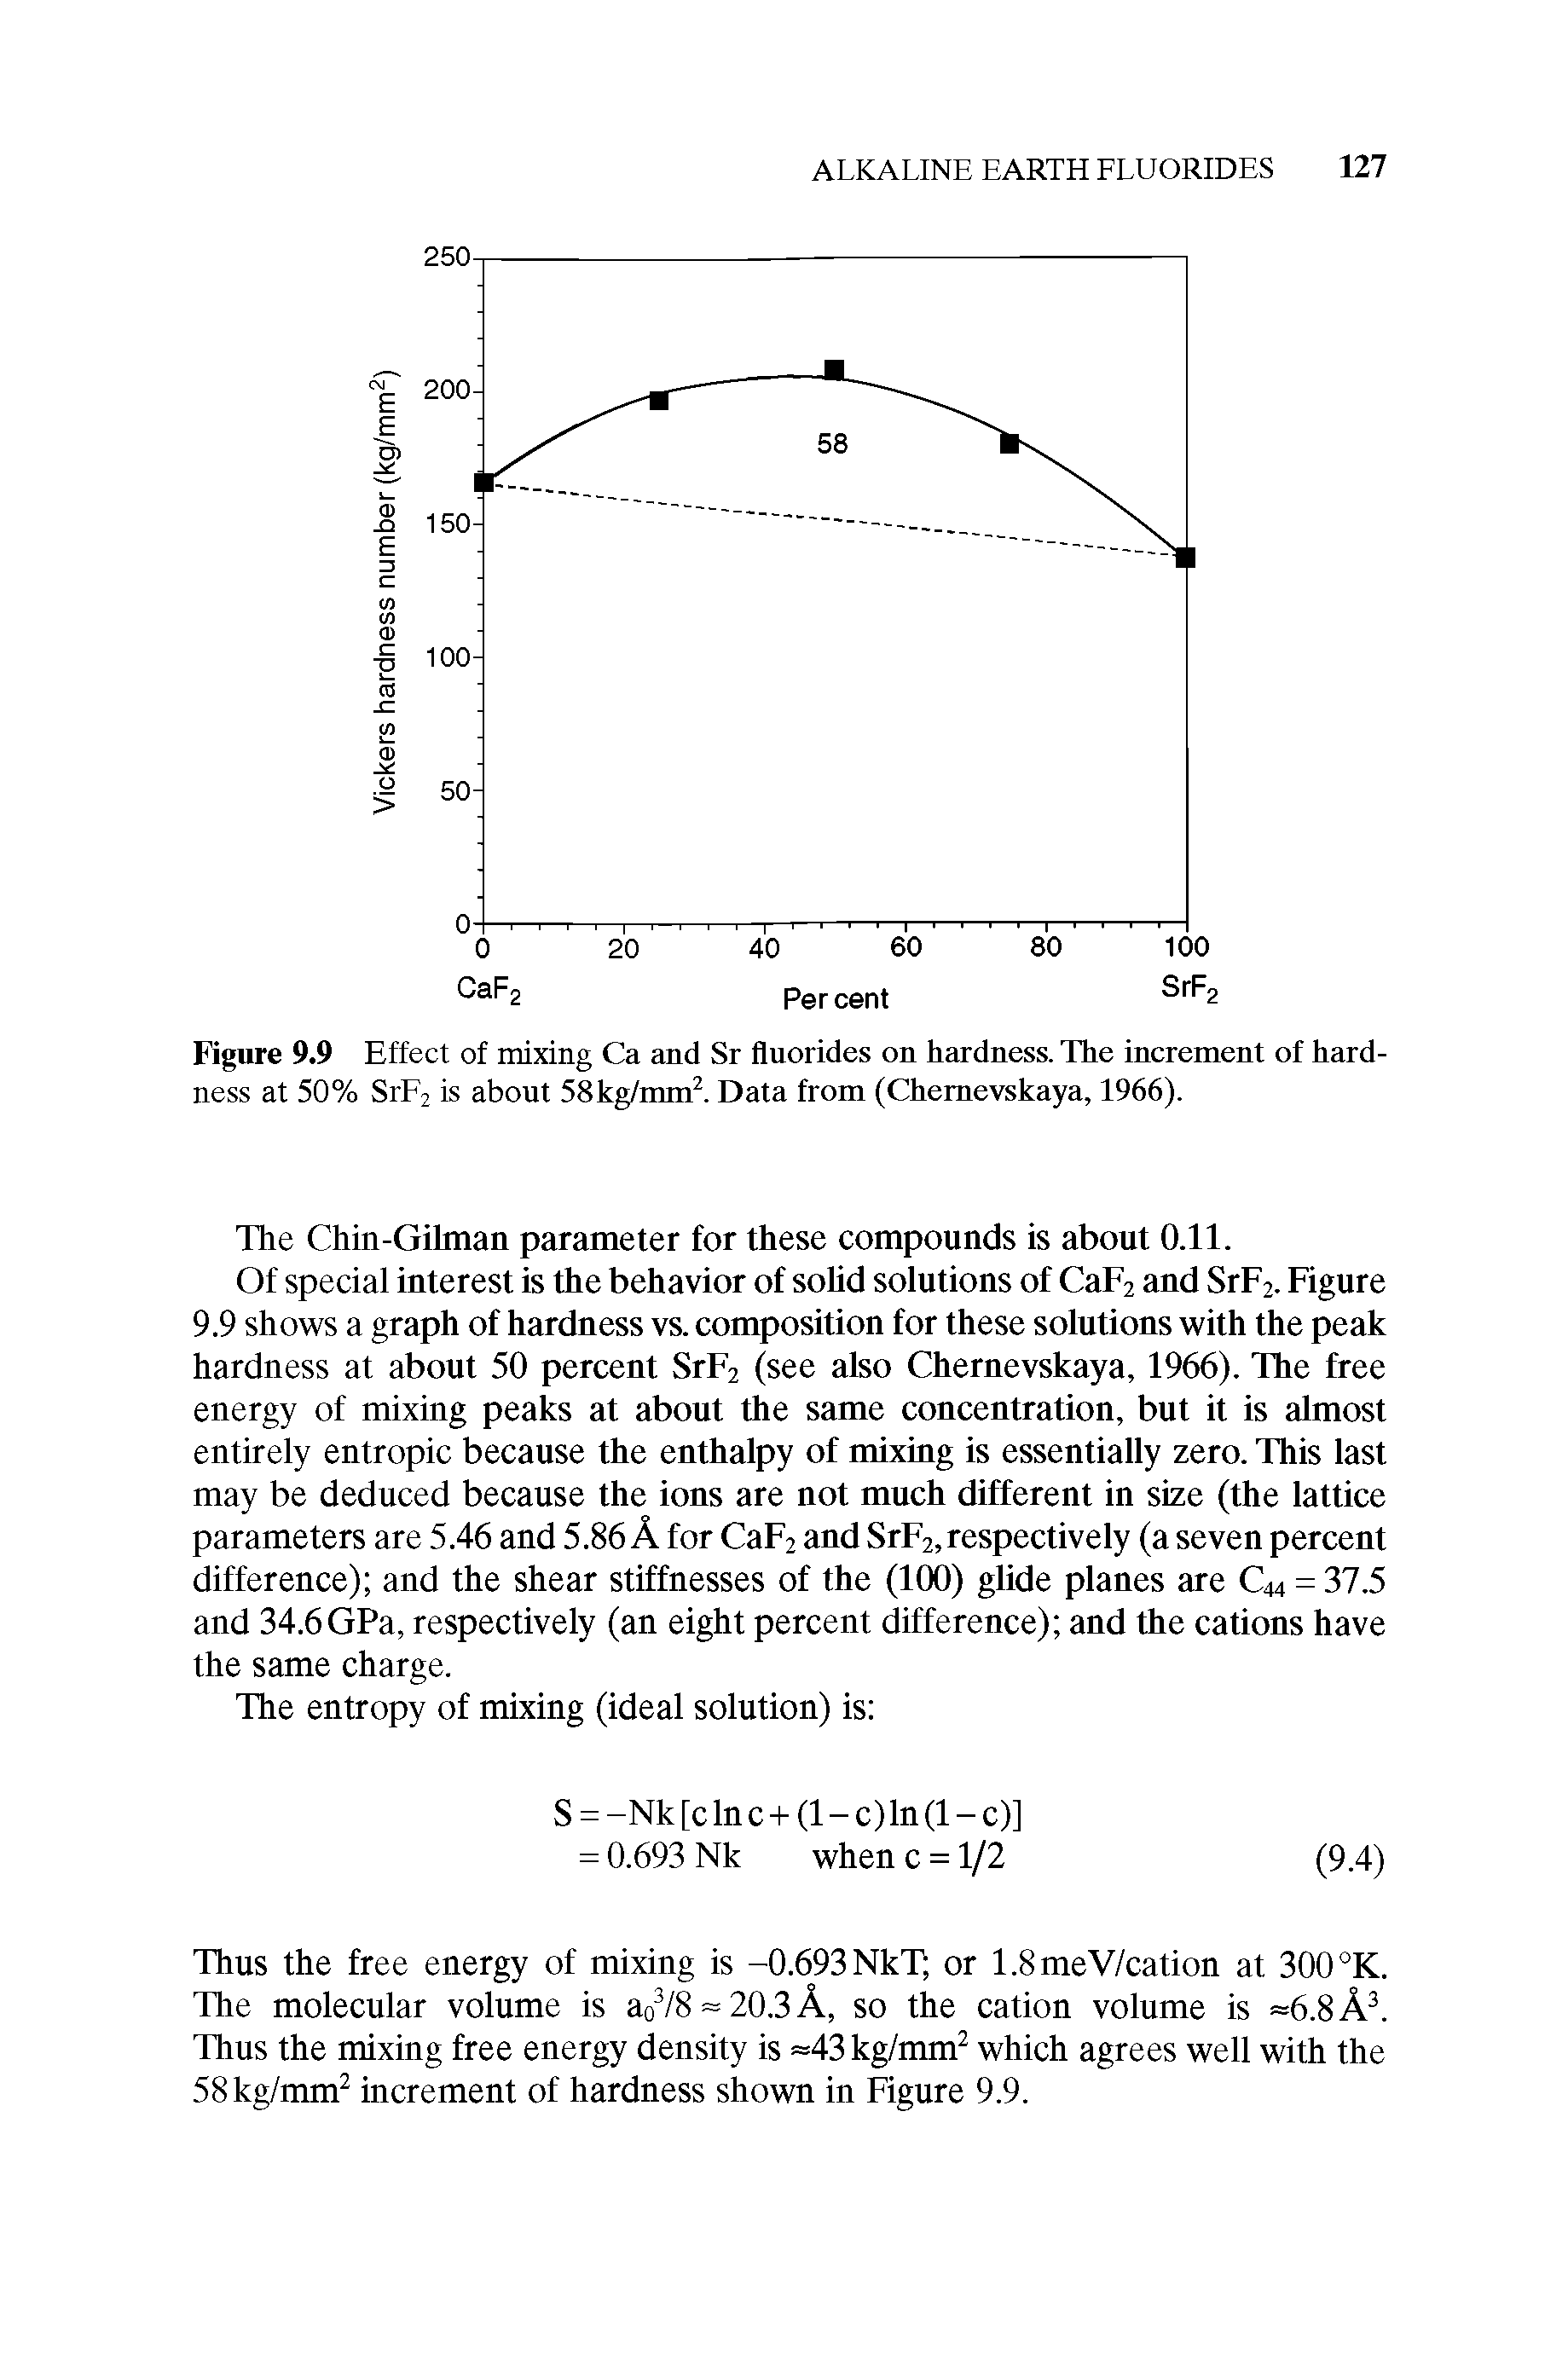 Figure 9.9 Effect of mixing Ca and Sr fluorides on hardness. The increment of hardness at 50% SrF2 is about 58kg/mm2. Data from (Chemevskaya, 1966).